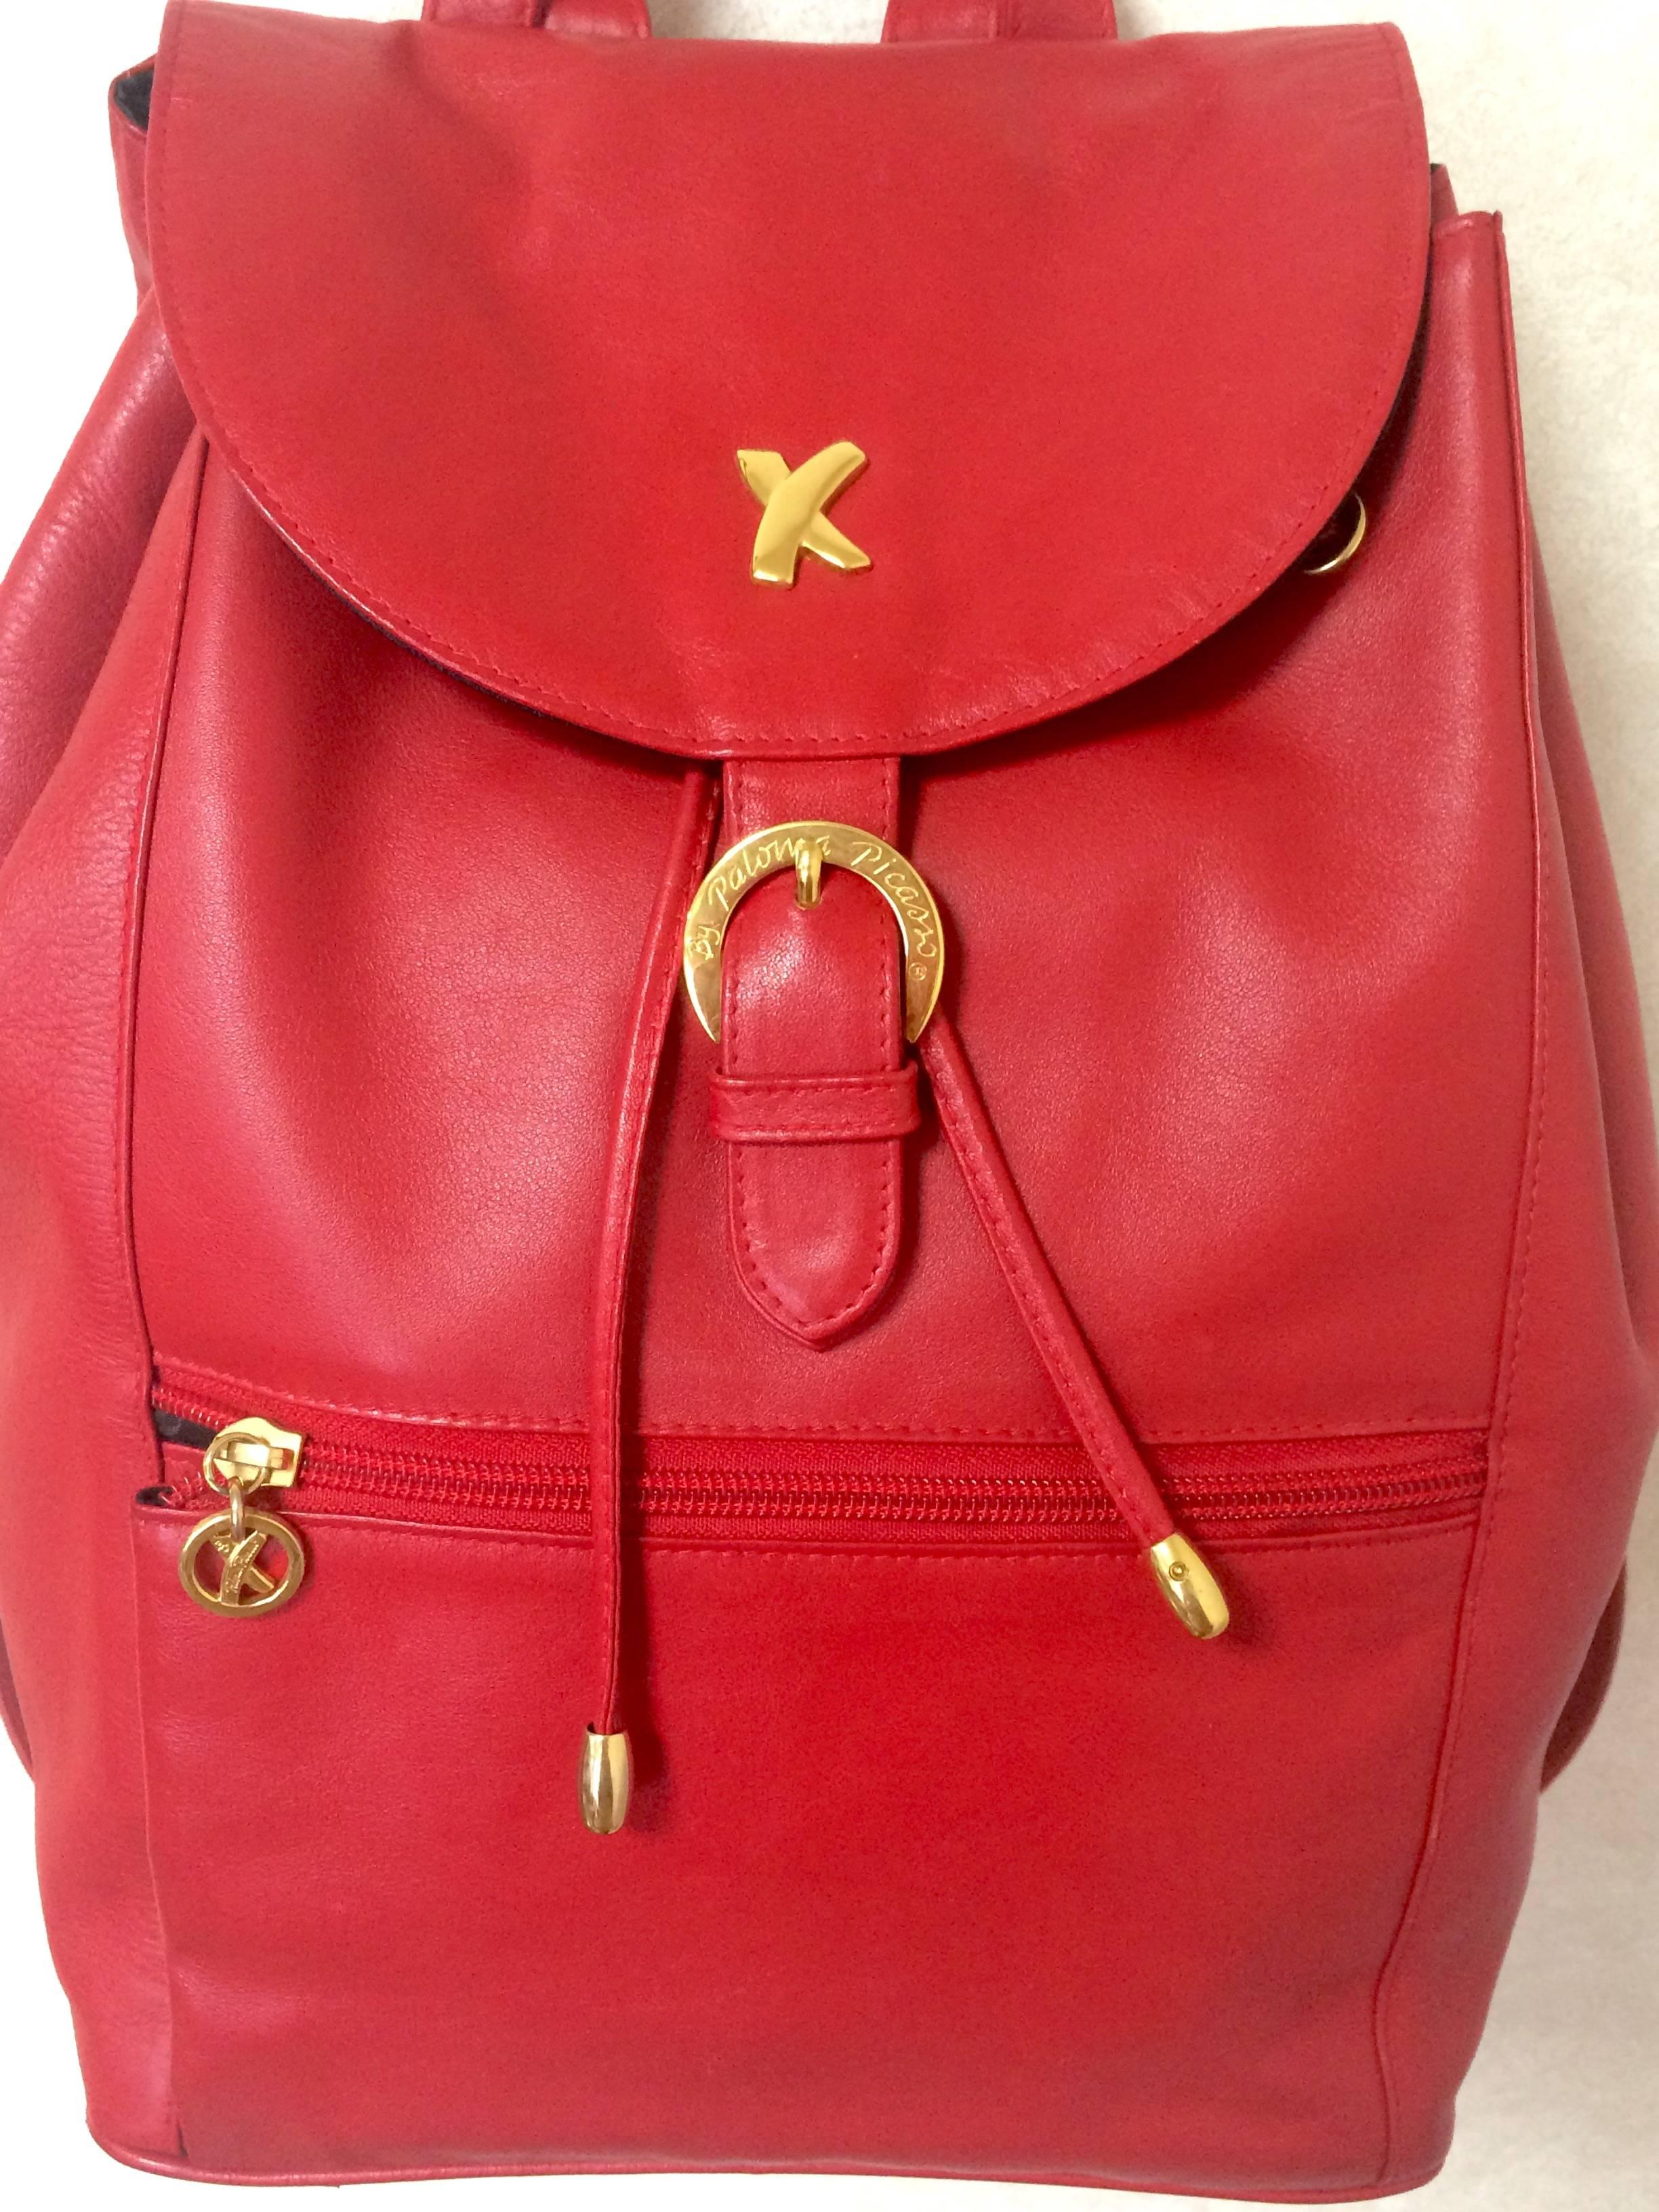 1990s. Vintage Paloma Picasso red leather backpack with golden logo motifs. Classic bag for unisex use.

Introducing a rare masterpiece, red leather backpack from Paloma Picasso back in the 90's. Beautiful red color and condition!

Featuring its